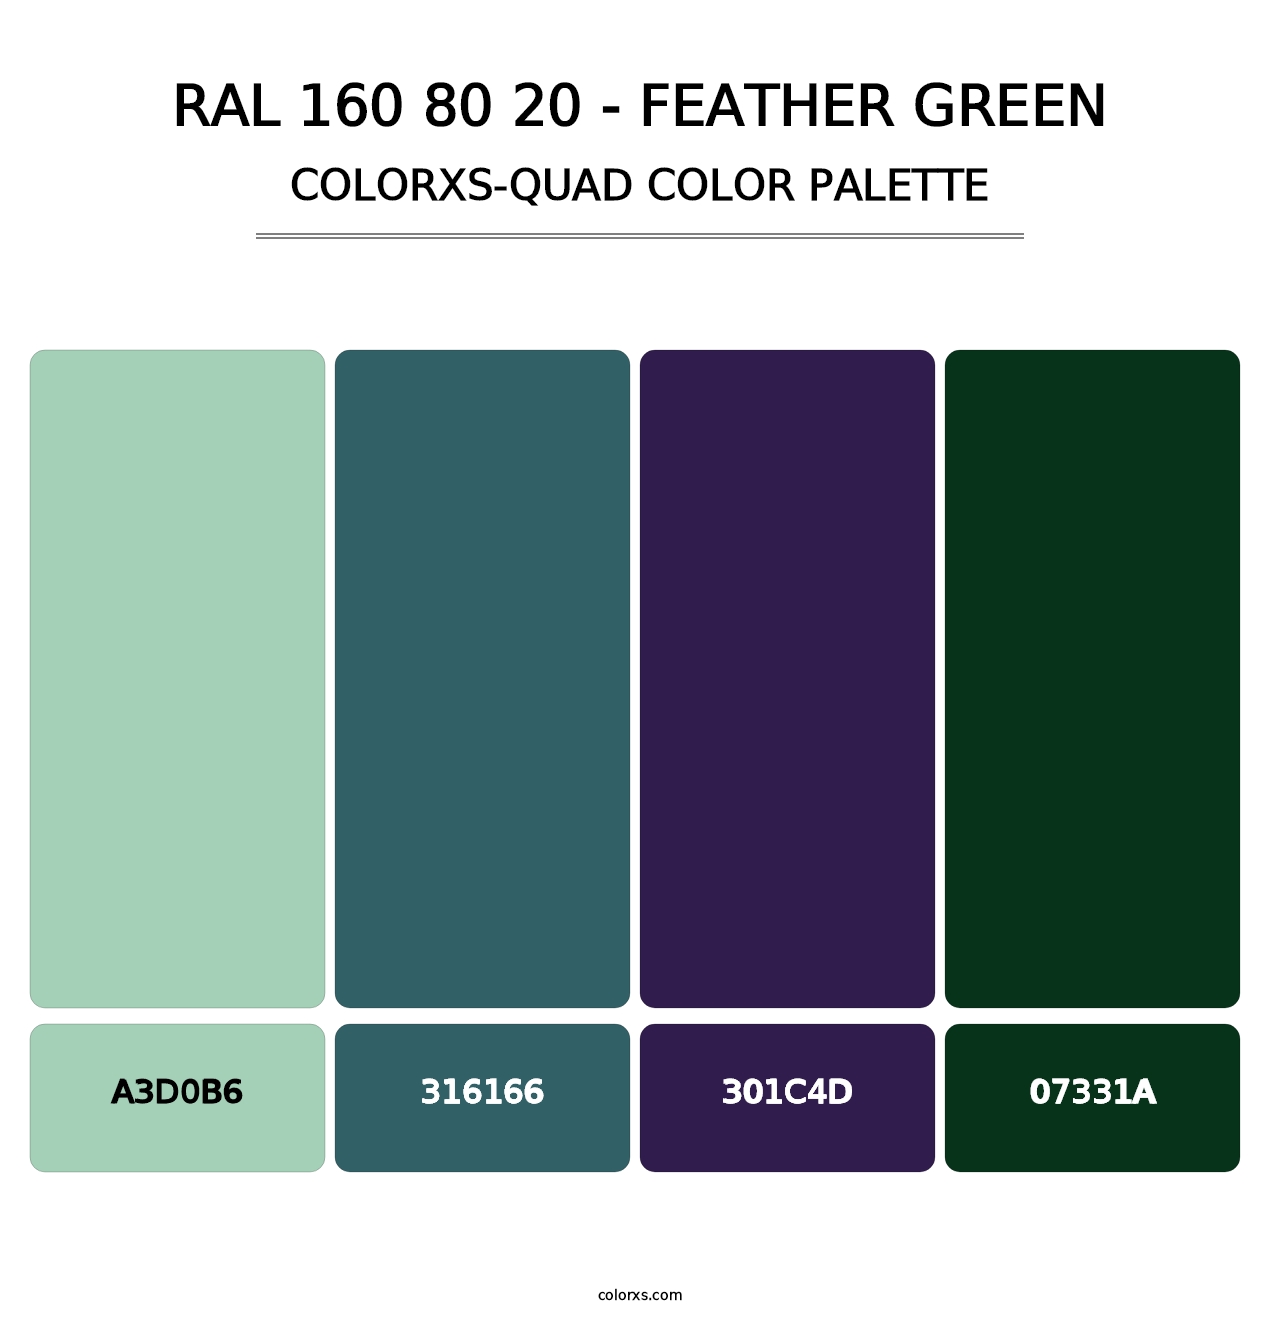 RAL 160 80 20 - Feather Green - Colorxs Quad Palette